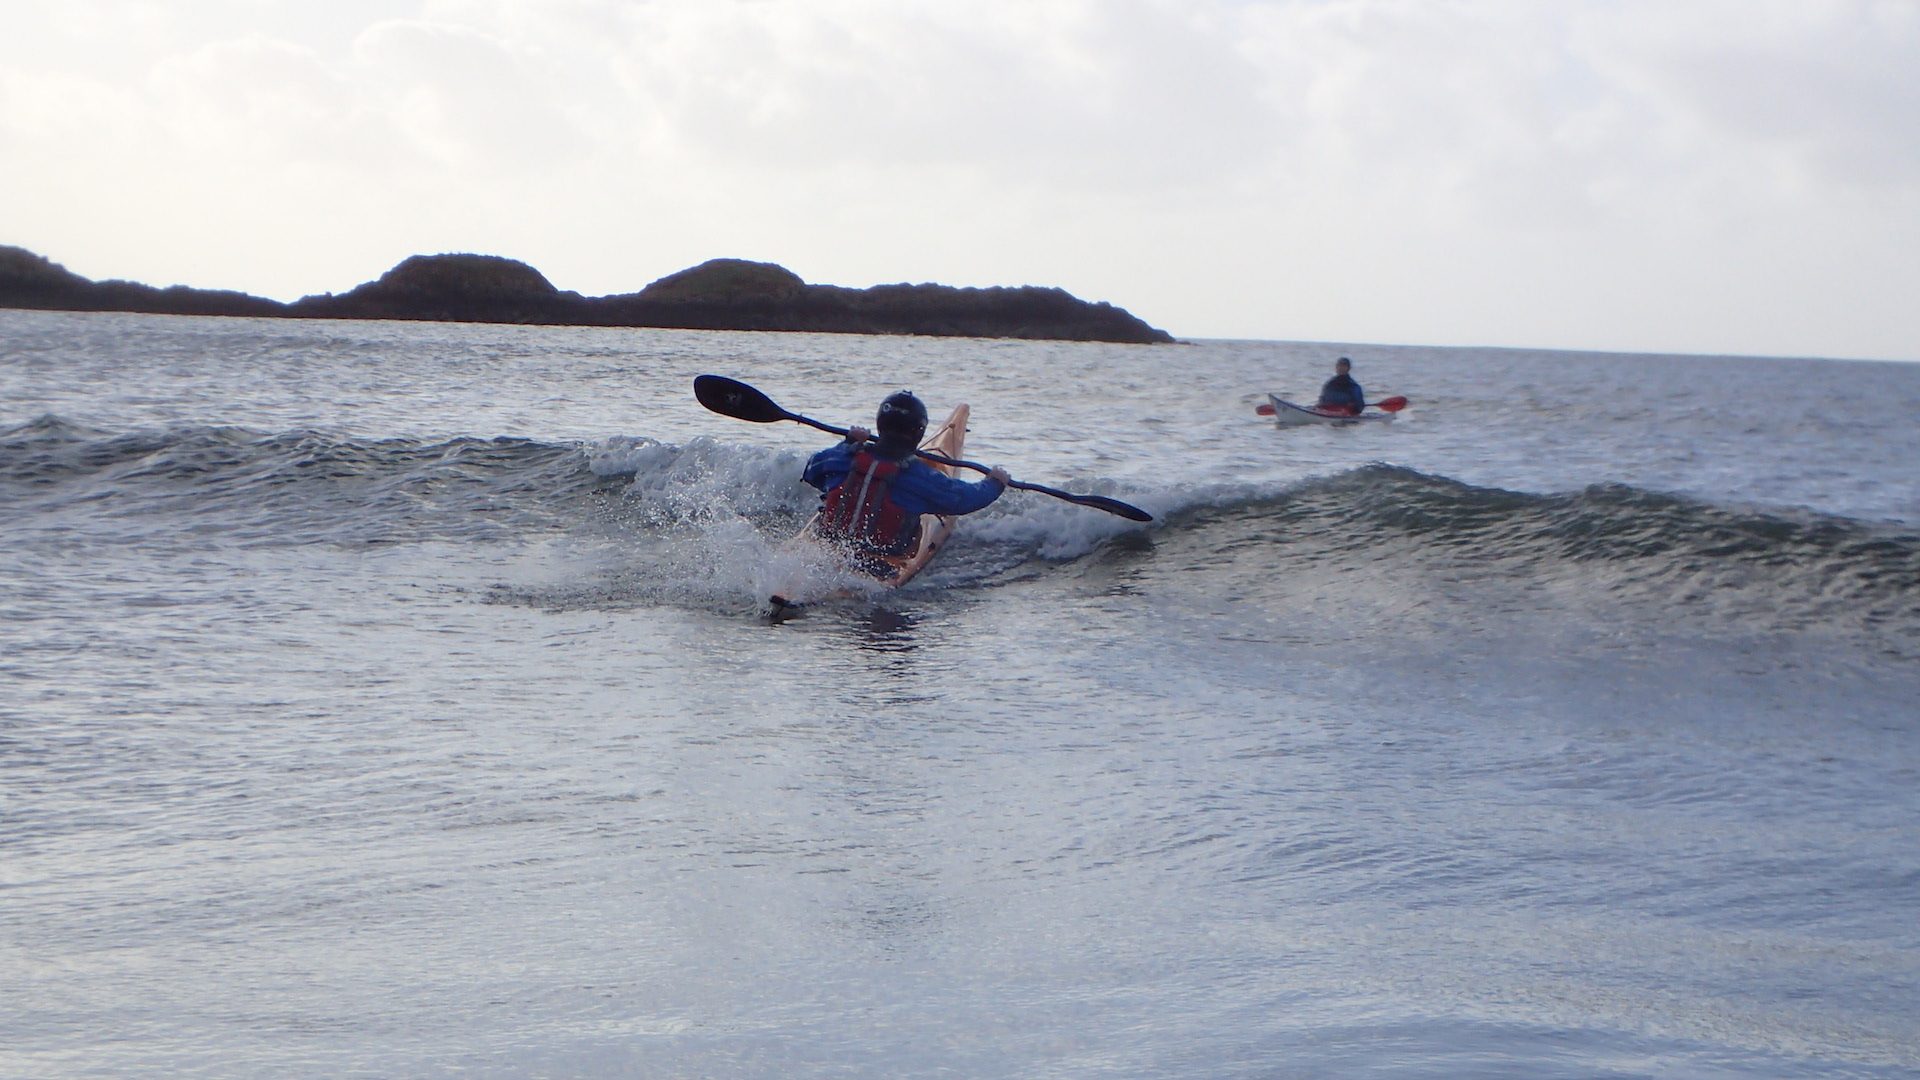 Curly back surfing (aka "taking it from behind") - Some say he enjoys it!